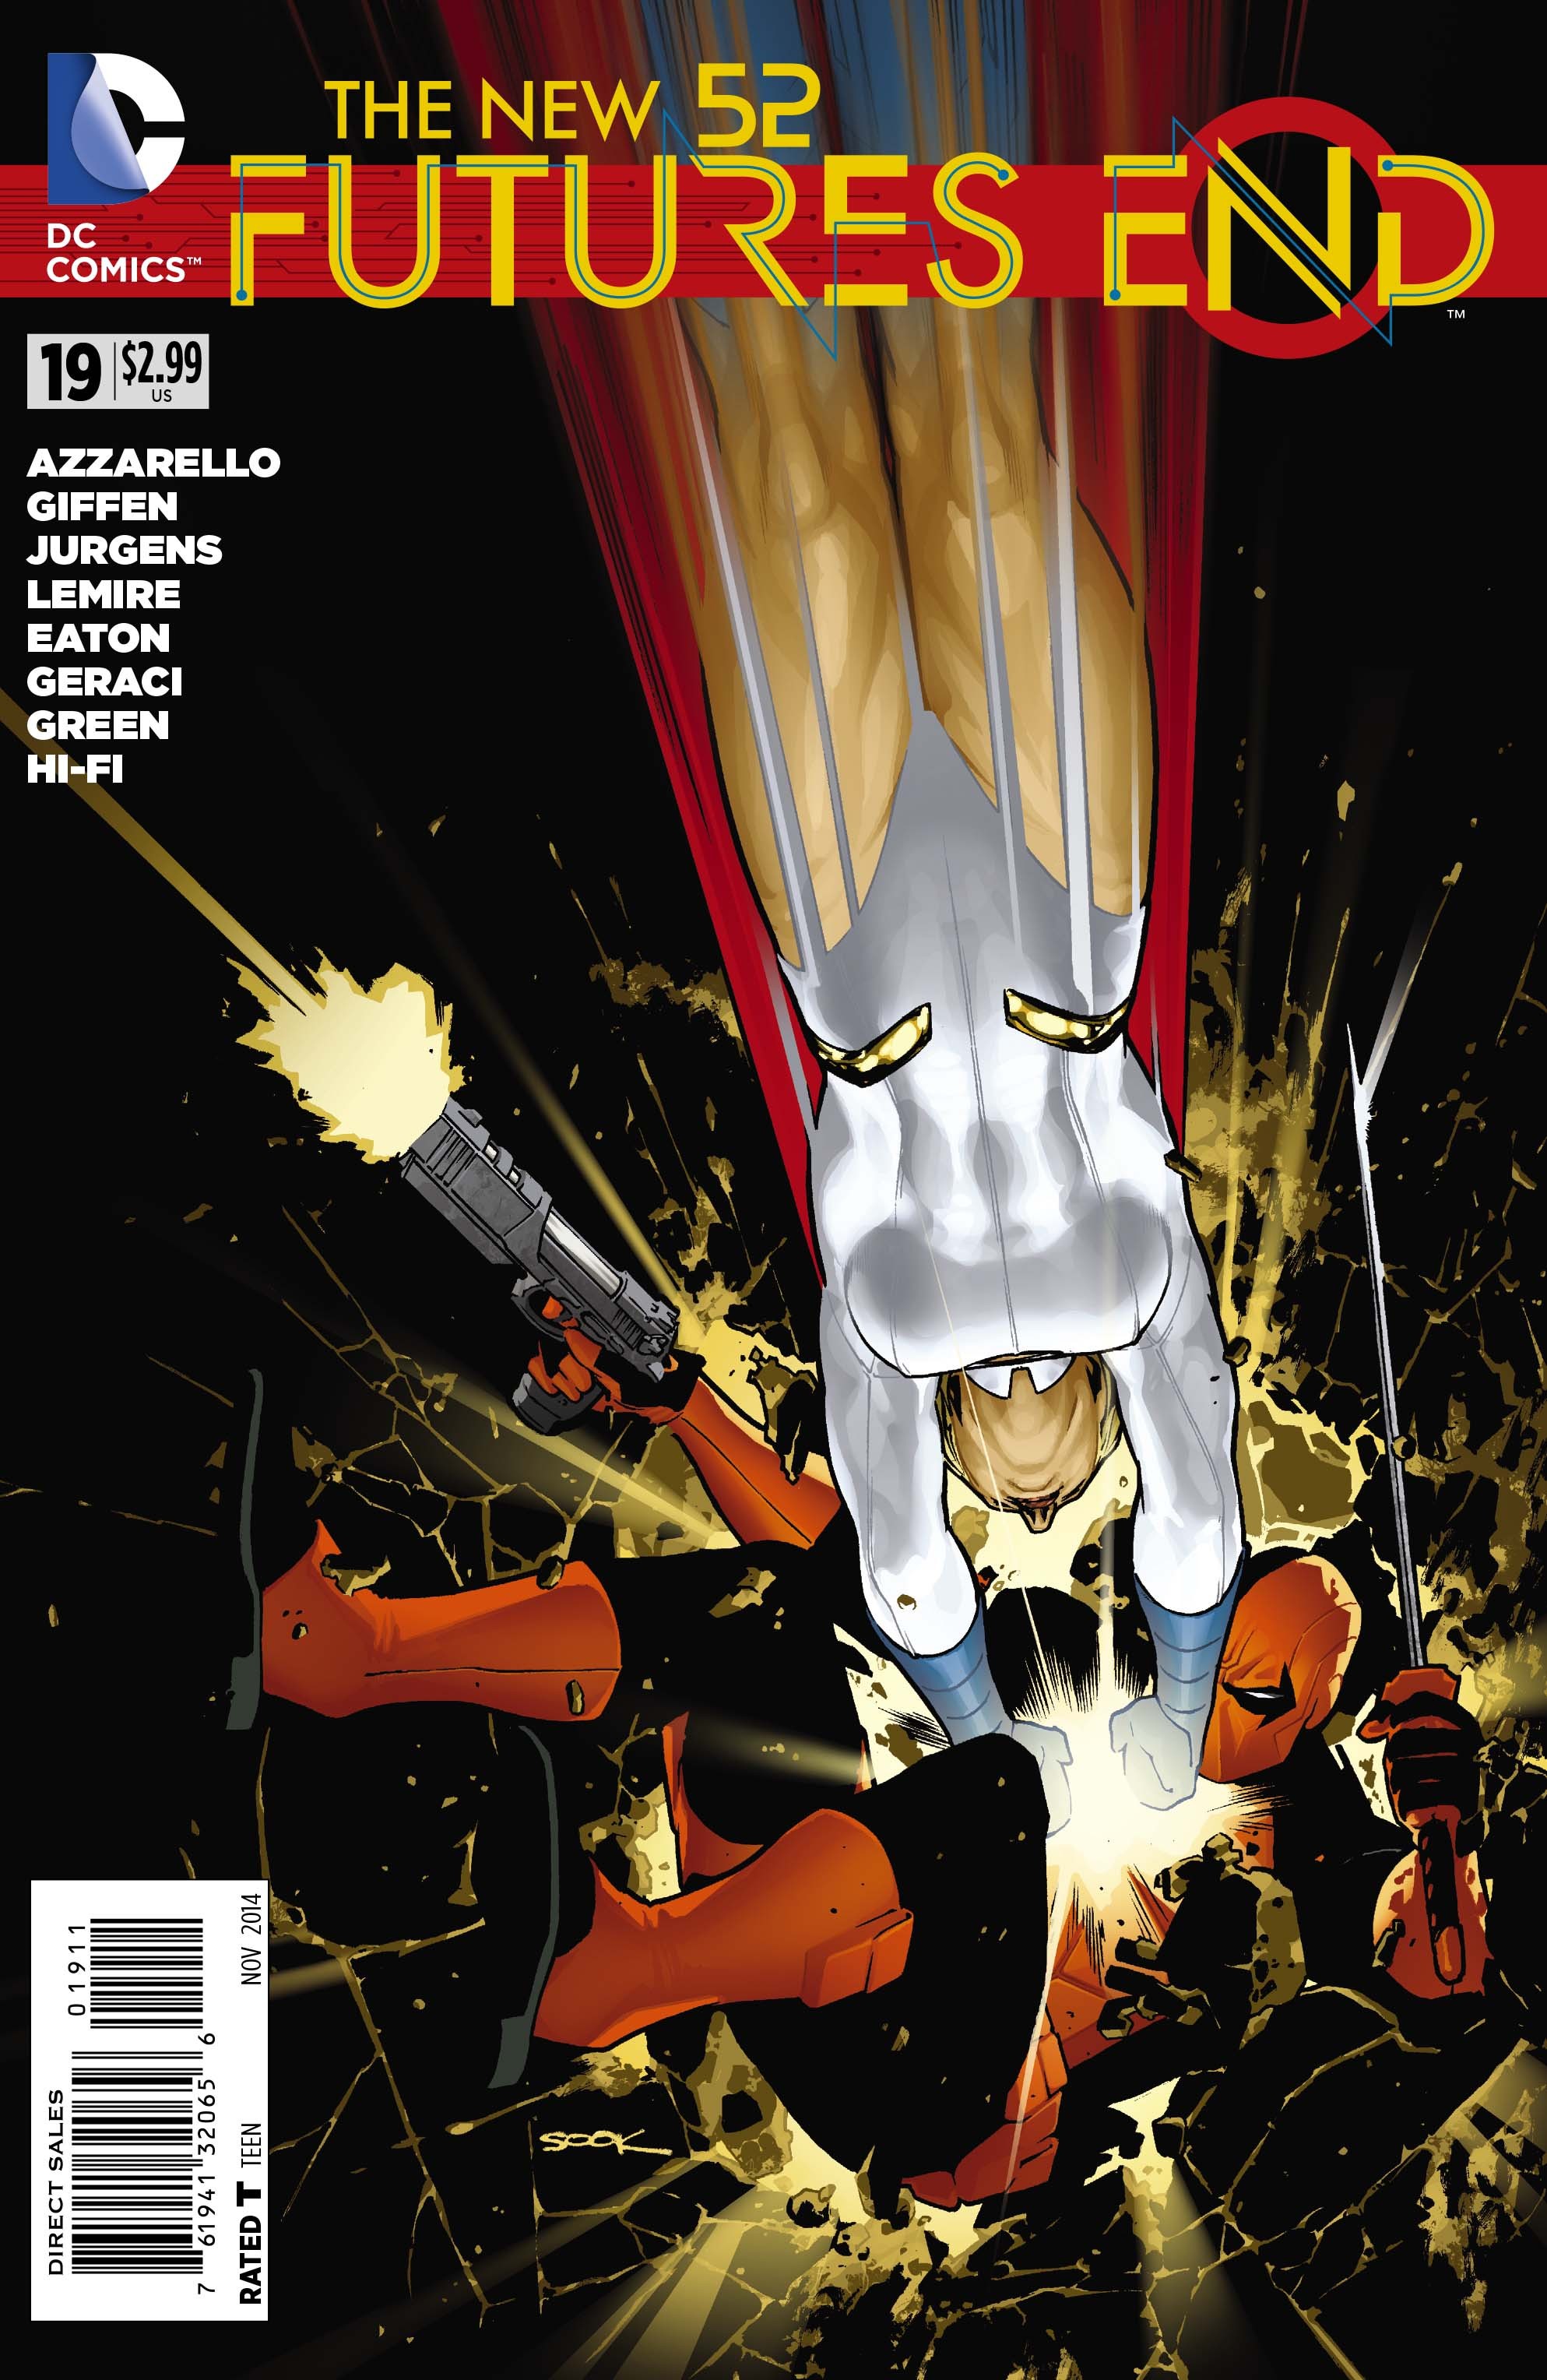 The New 52: Futures End Vol. 1 #19